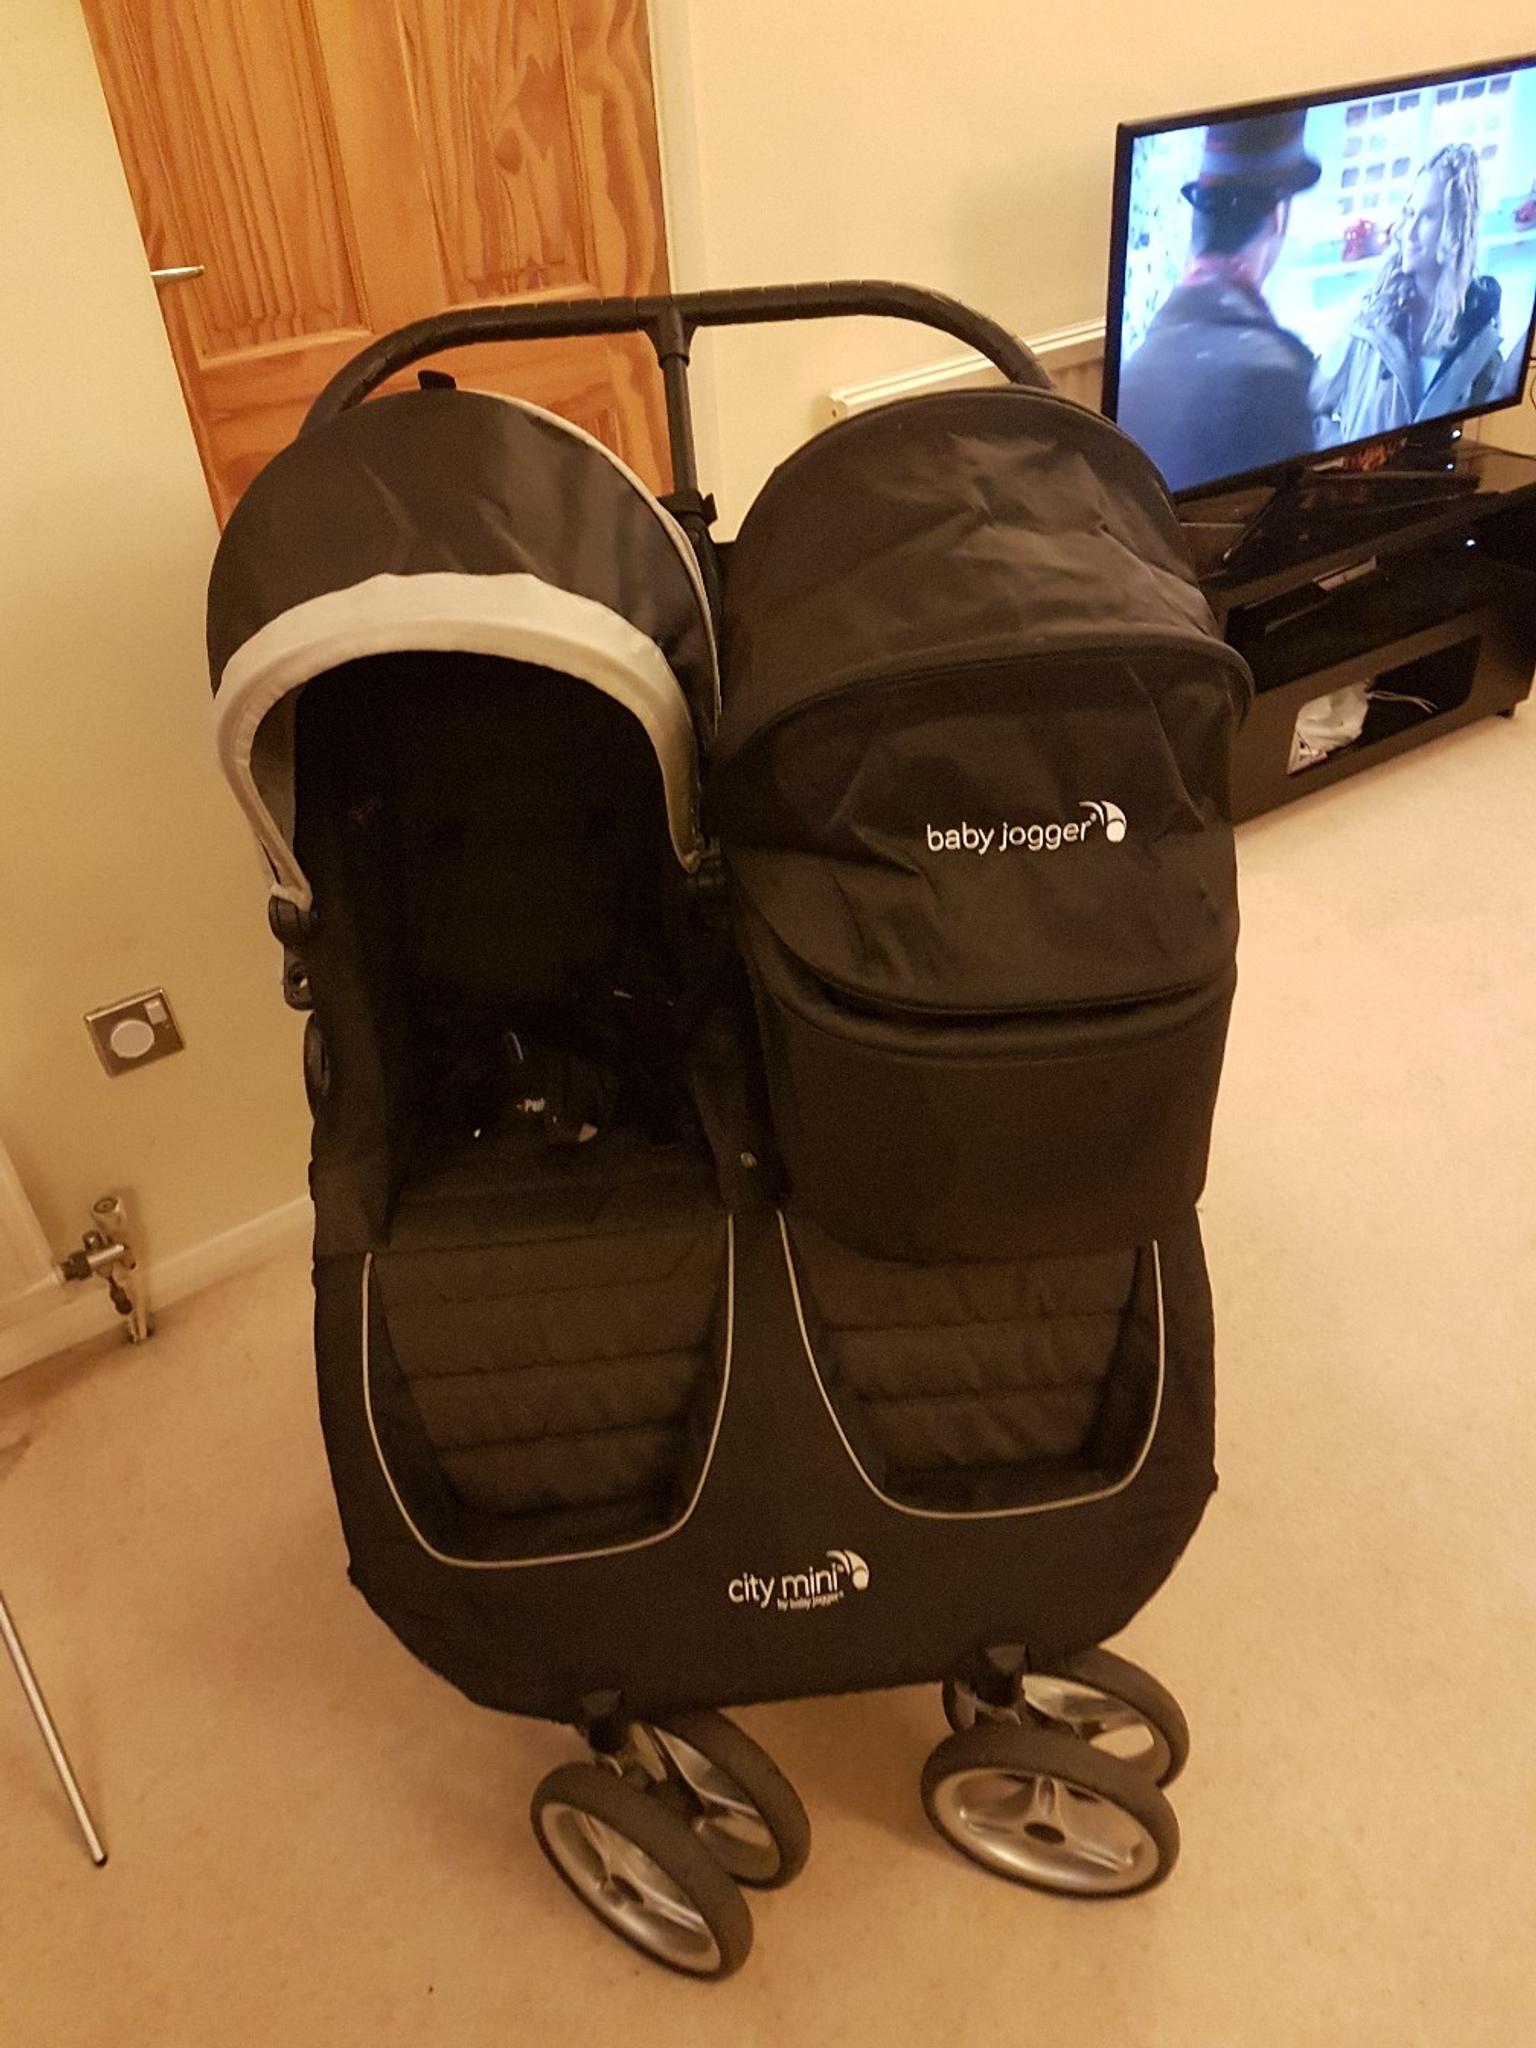 baby jogger double carrycot